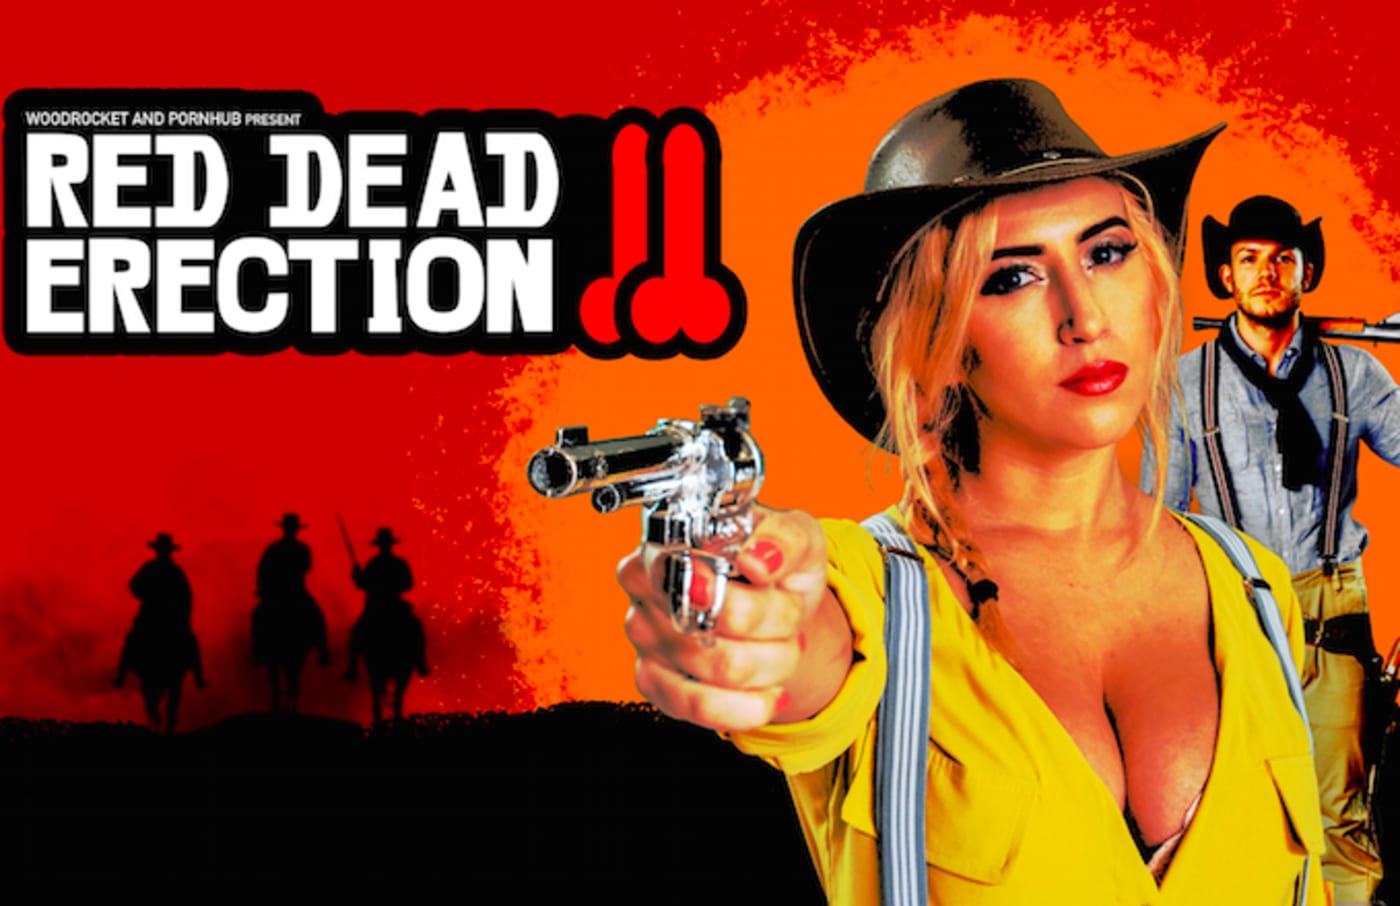 Xxx Rad Pron - There's Now an Adult Film Parody of 'Red Dead Redemption II' | Complex